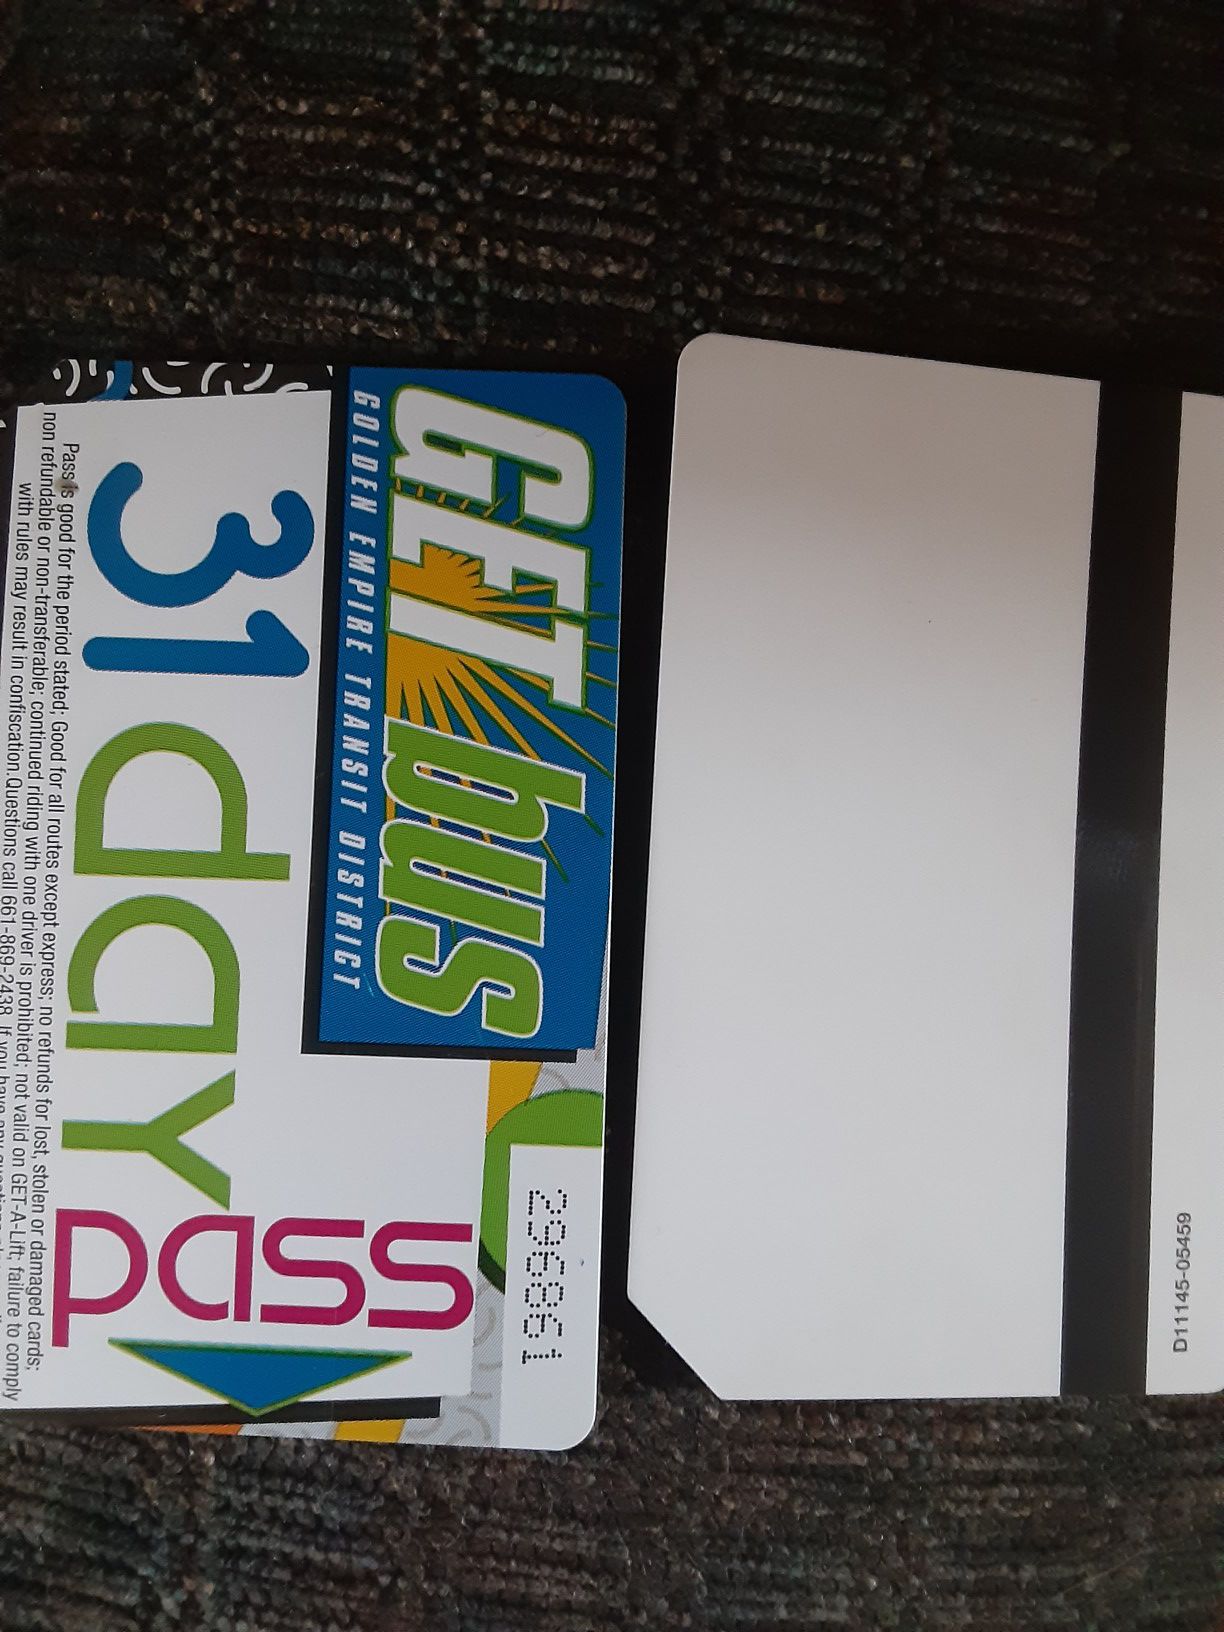 Monthly bus passes